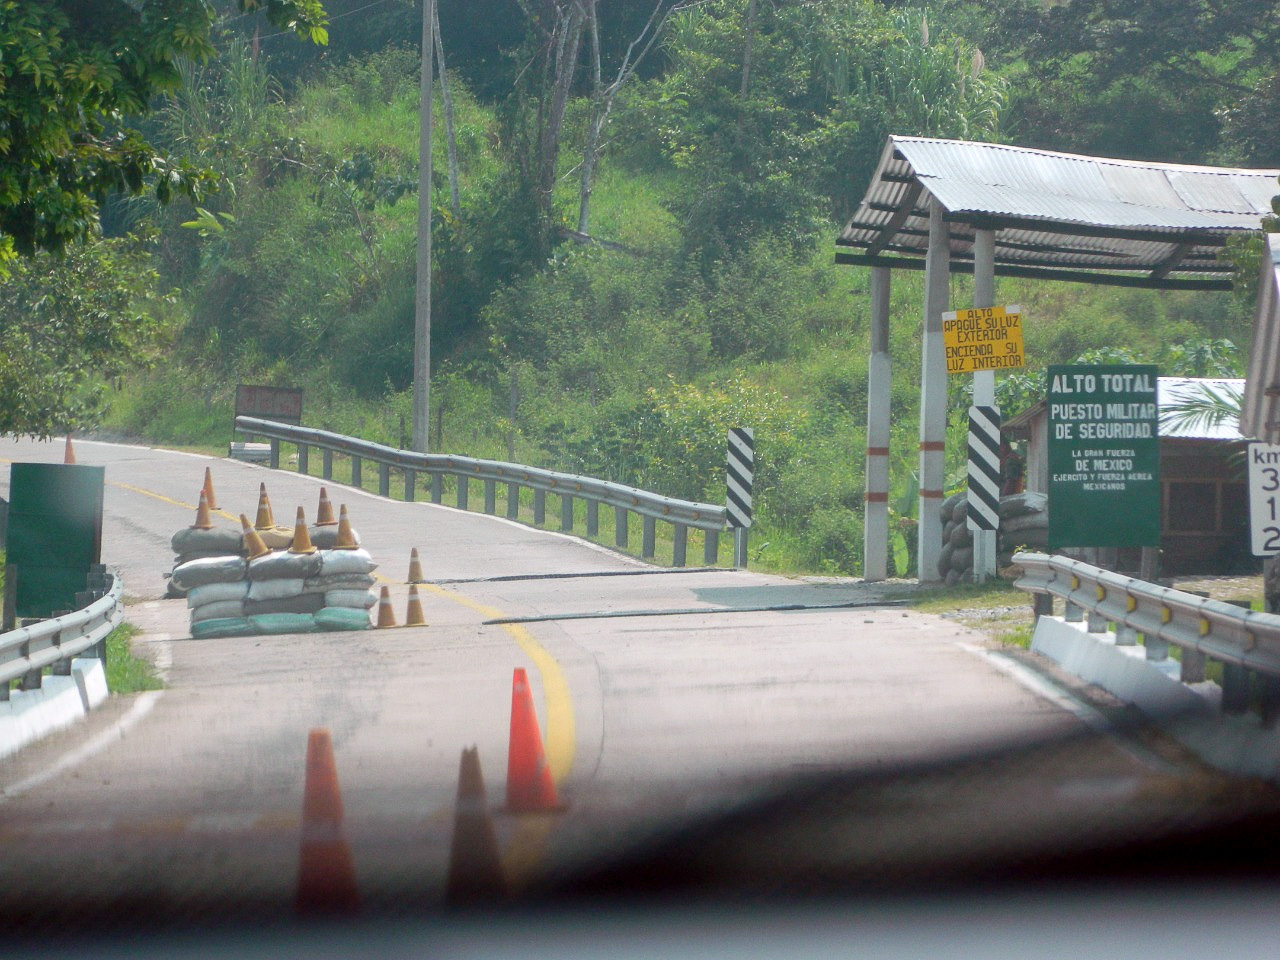 Military checkpoints in the Pacific, jungle and central migration corridors © Voces Mesoamericanas